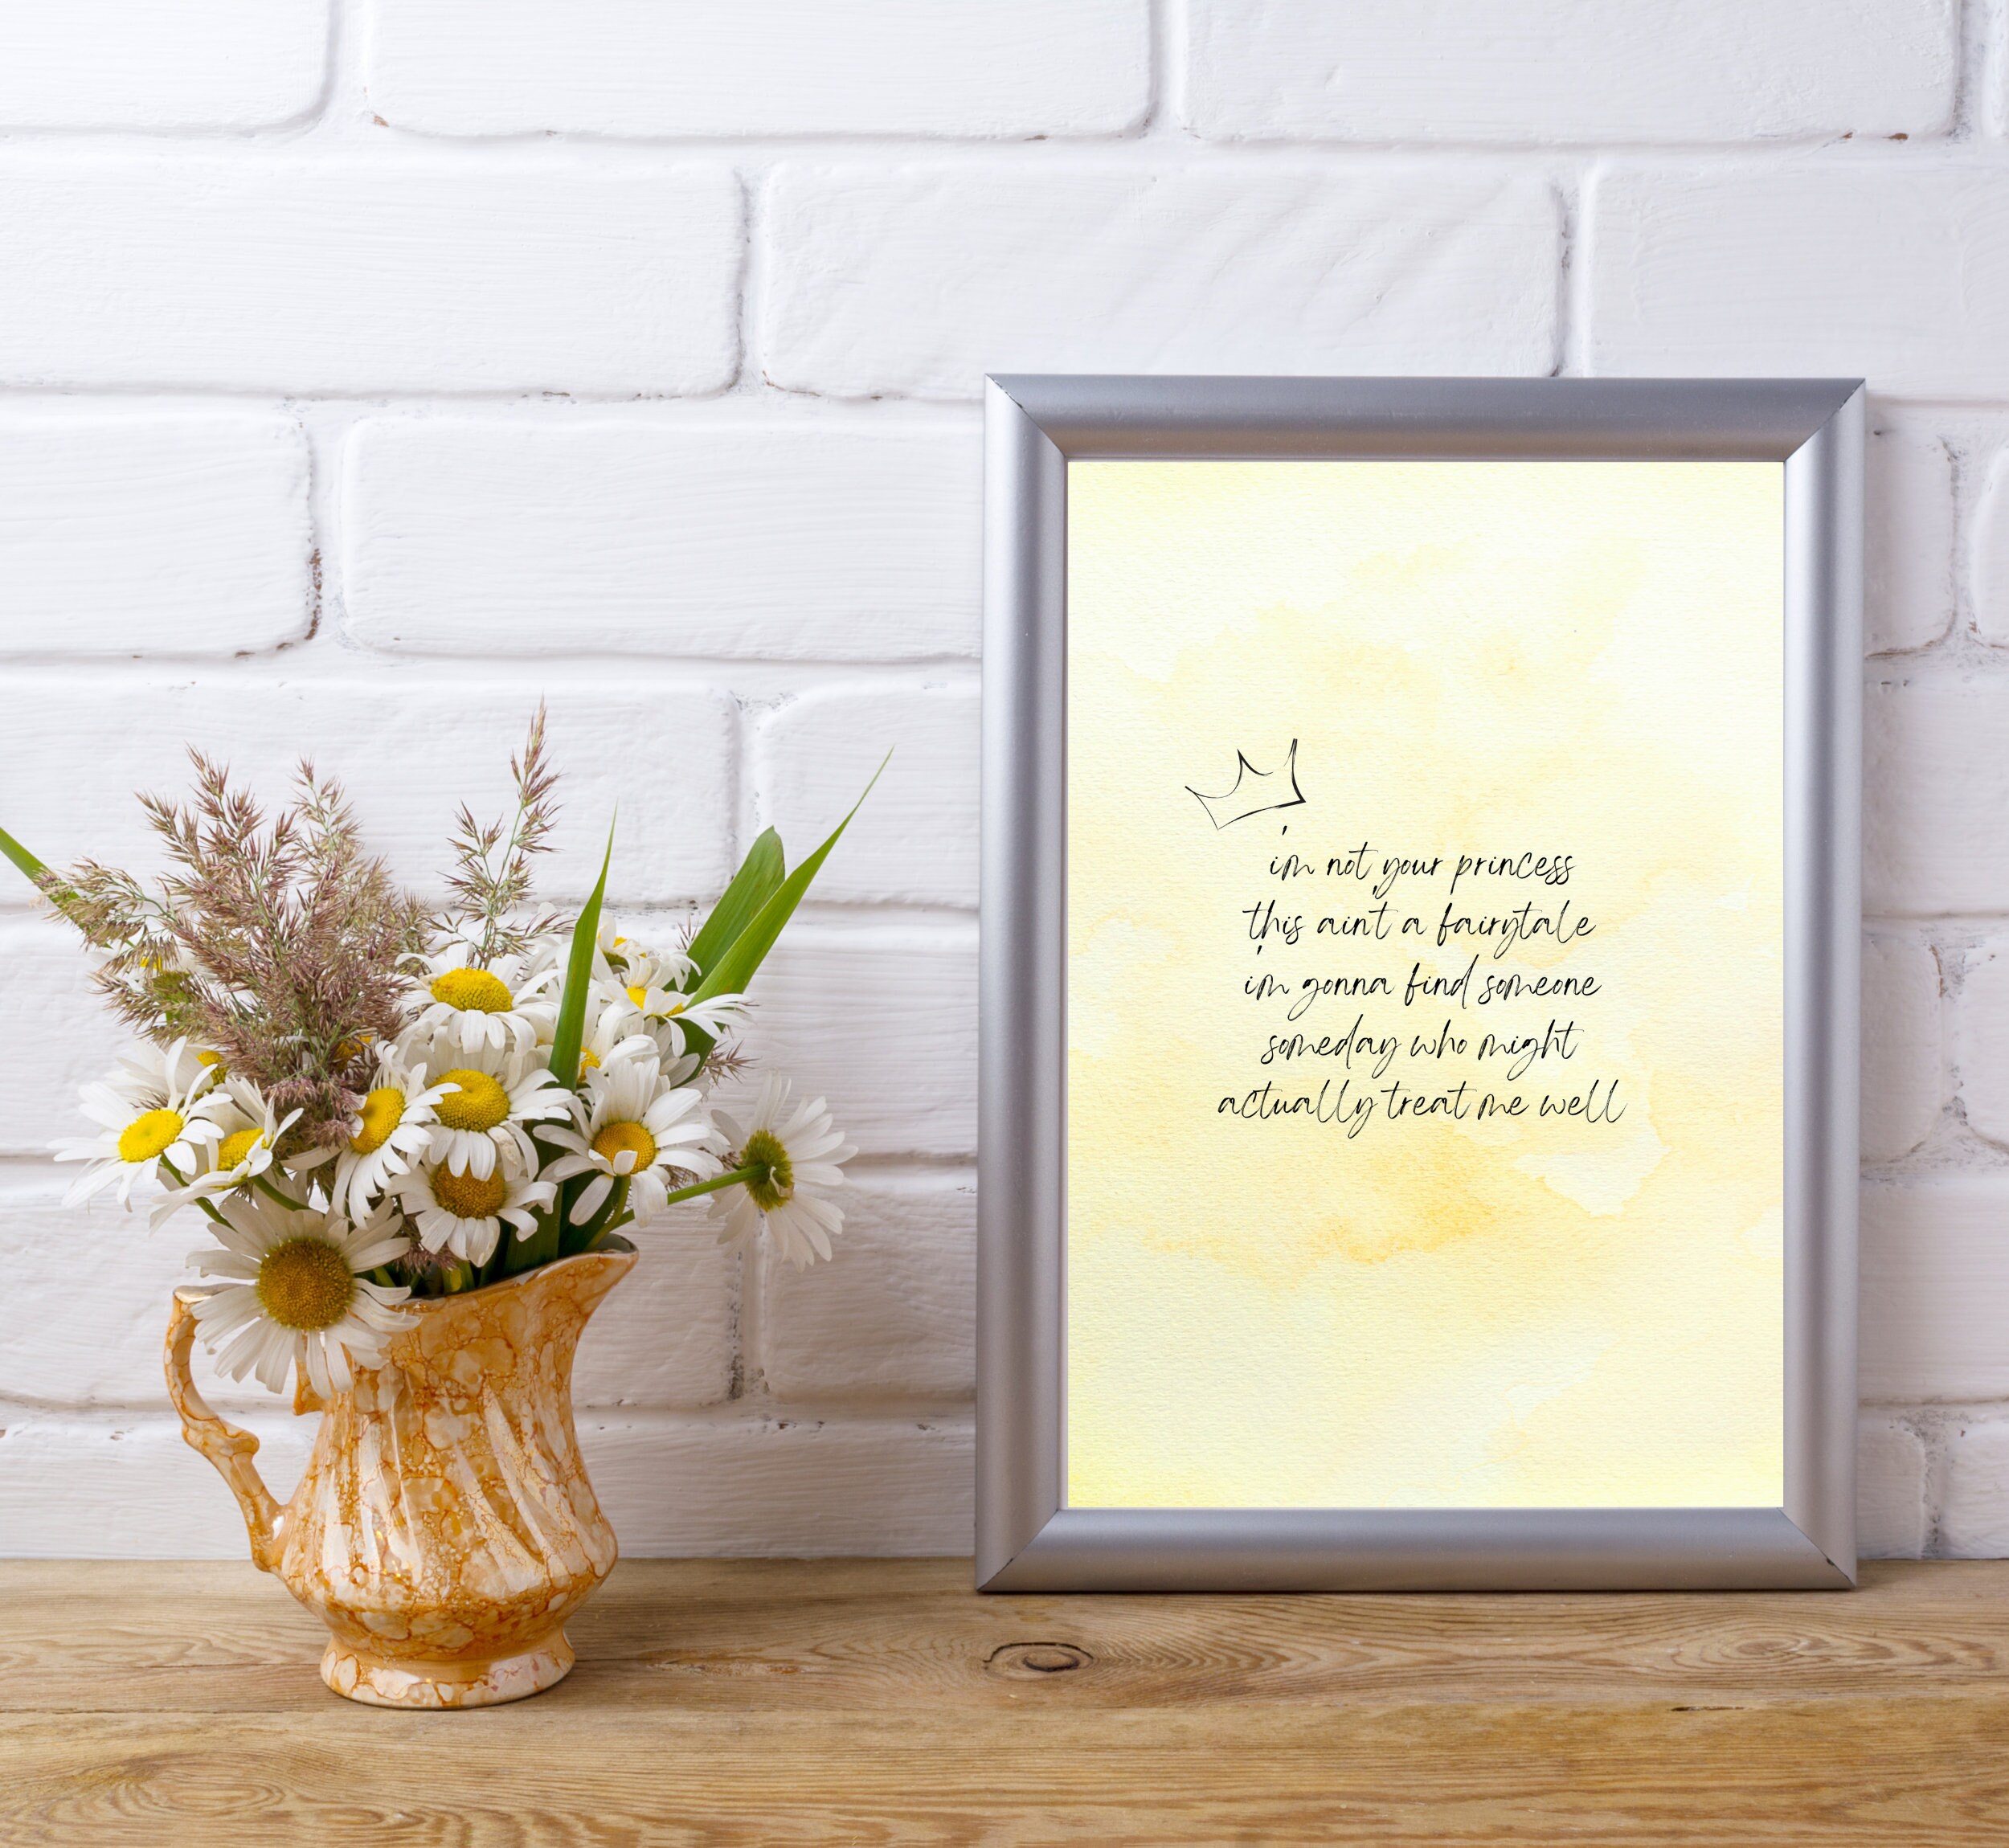 Fearless White Horse Taylor Swift Watercolor Lyric Wall Art